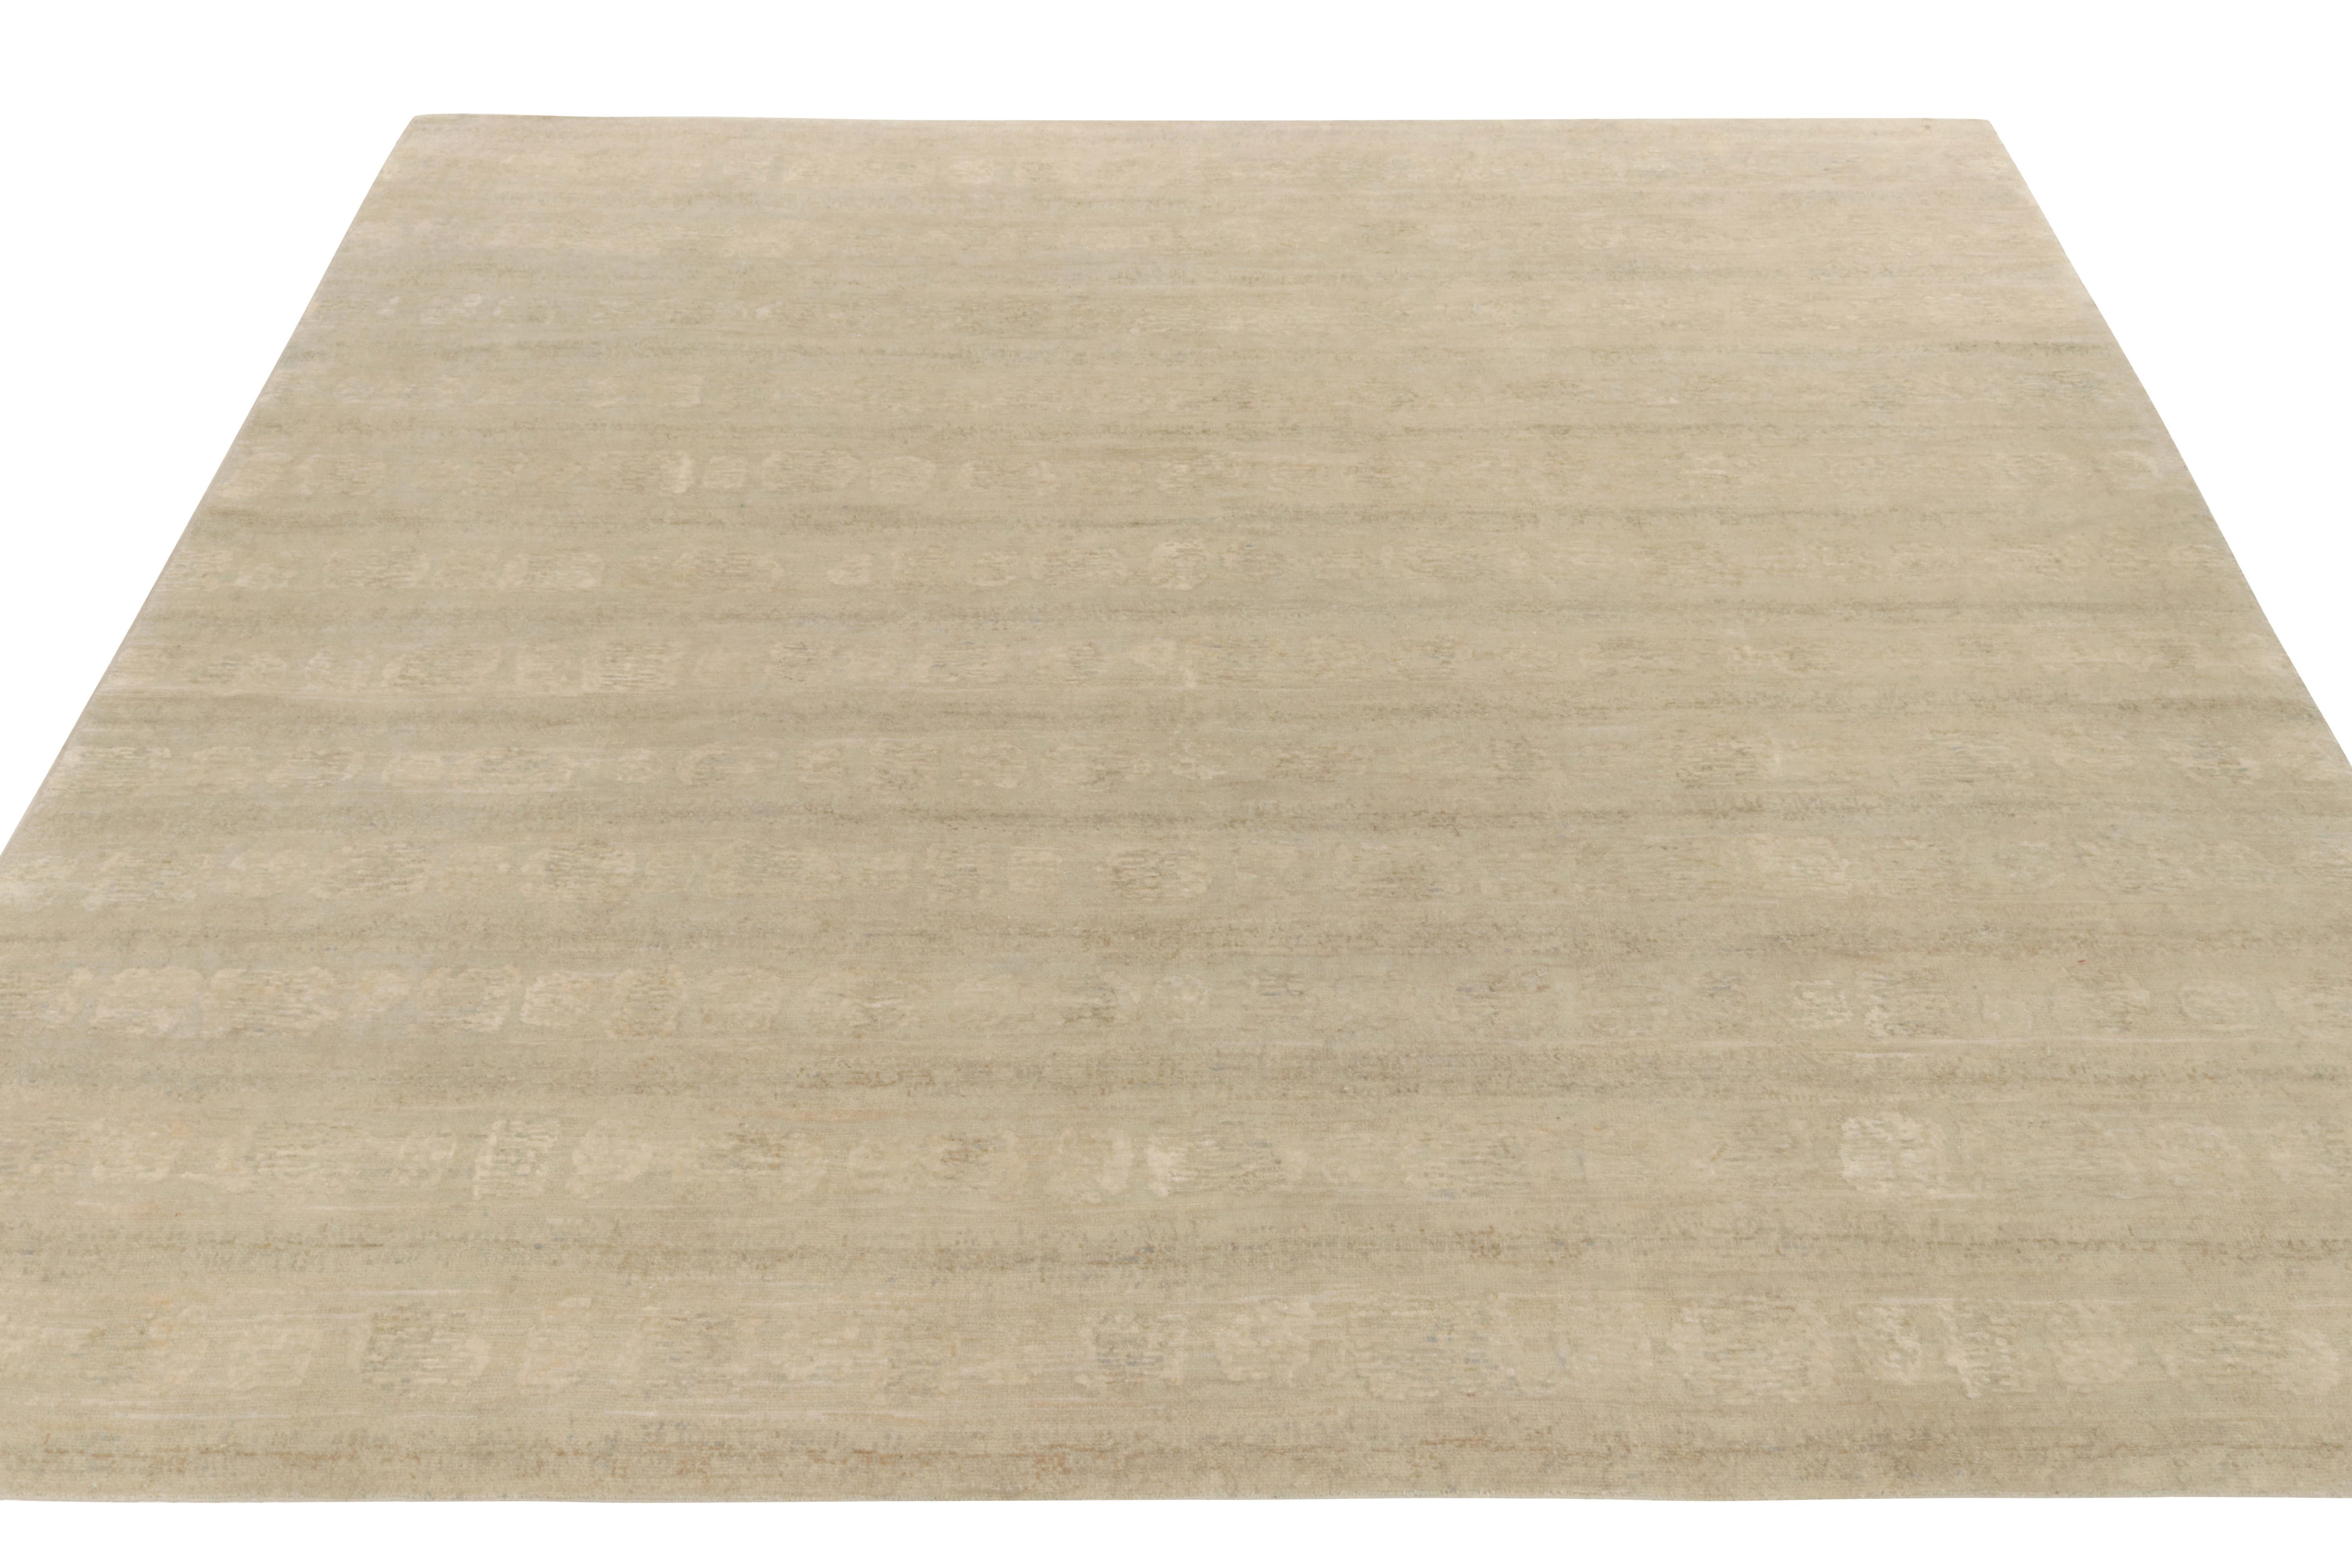 From Rug & Kilim’s Texture of Color selections, a hand-knotted square rug embracing modern sensibilities on neutrals and subtle accents. The 11x11 rug comfortably plays positive negative in tones of beige & grey with subdued green hues for a quiet